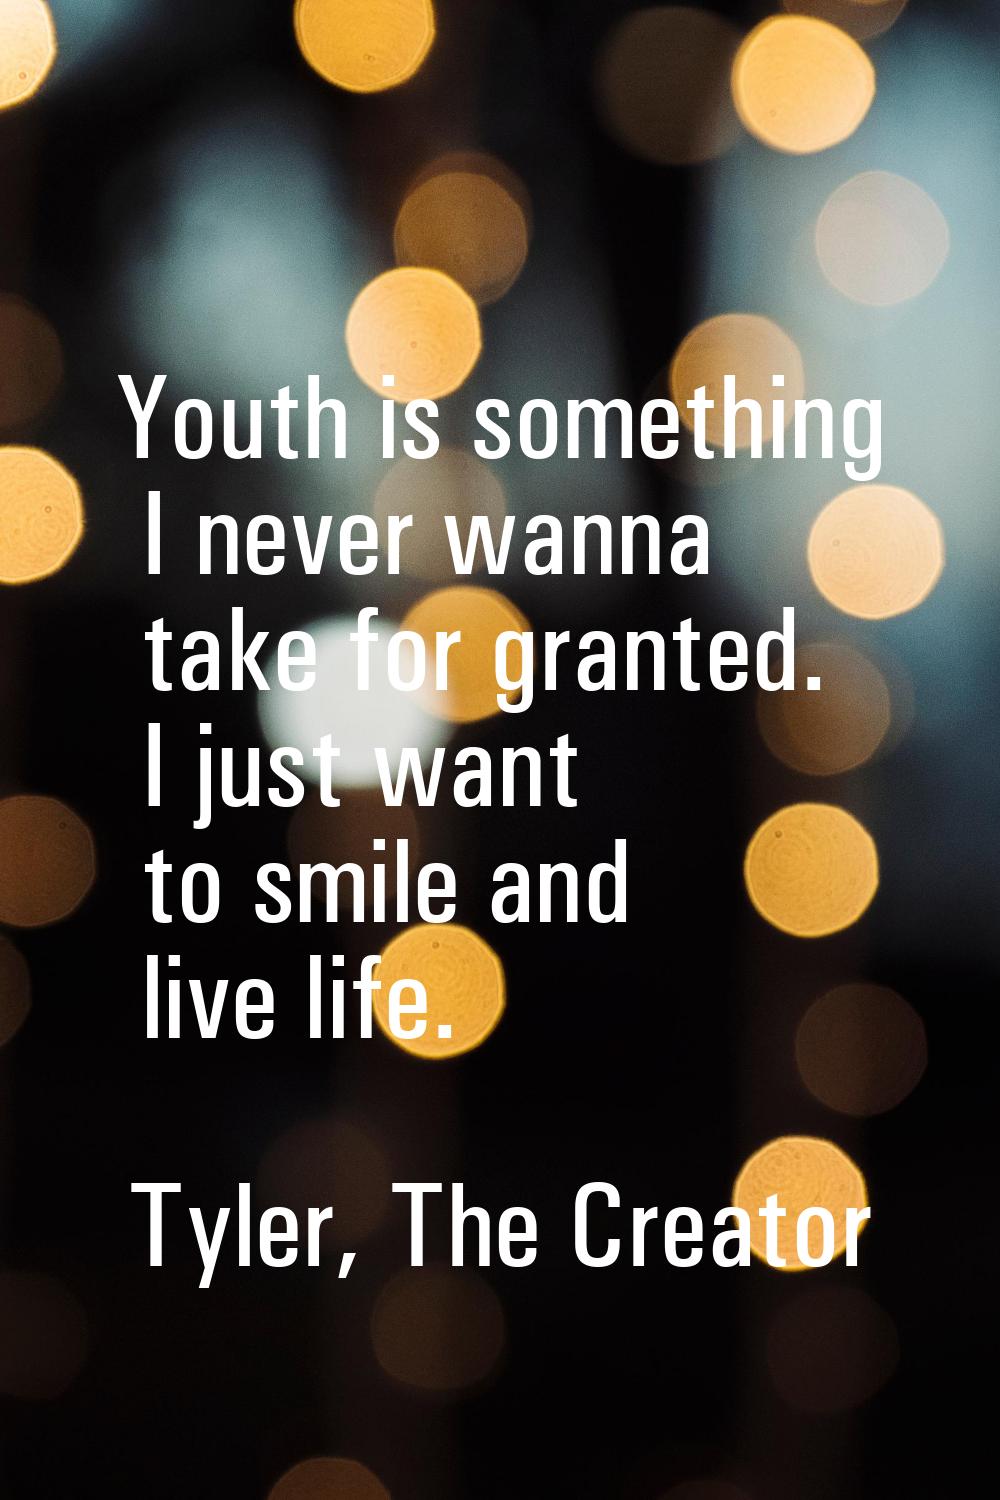 Youth is something I never wanna take for granted. I just want to smile and live life.